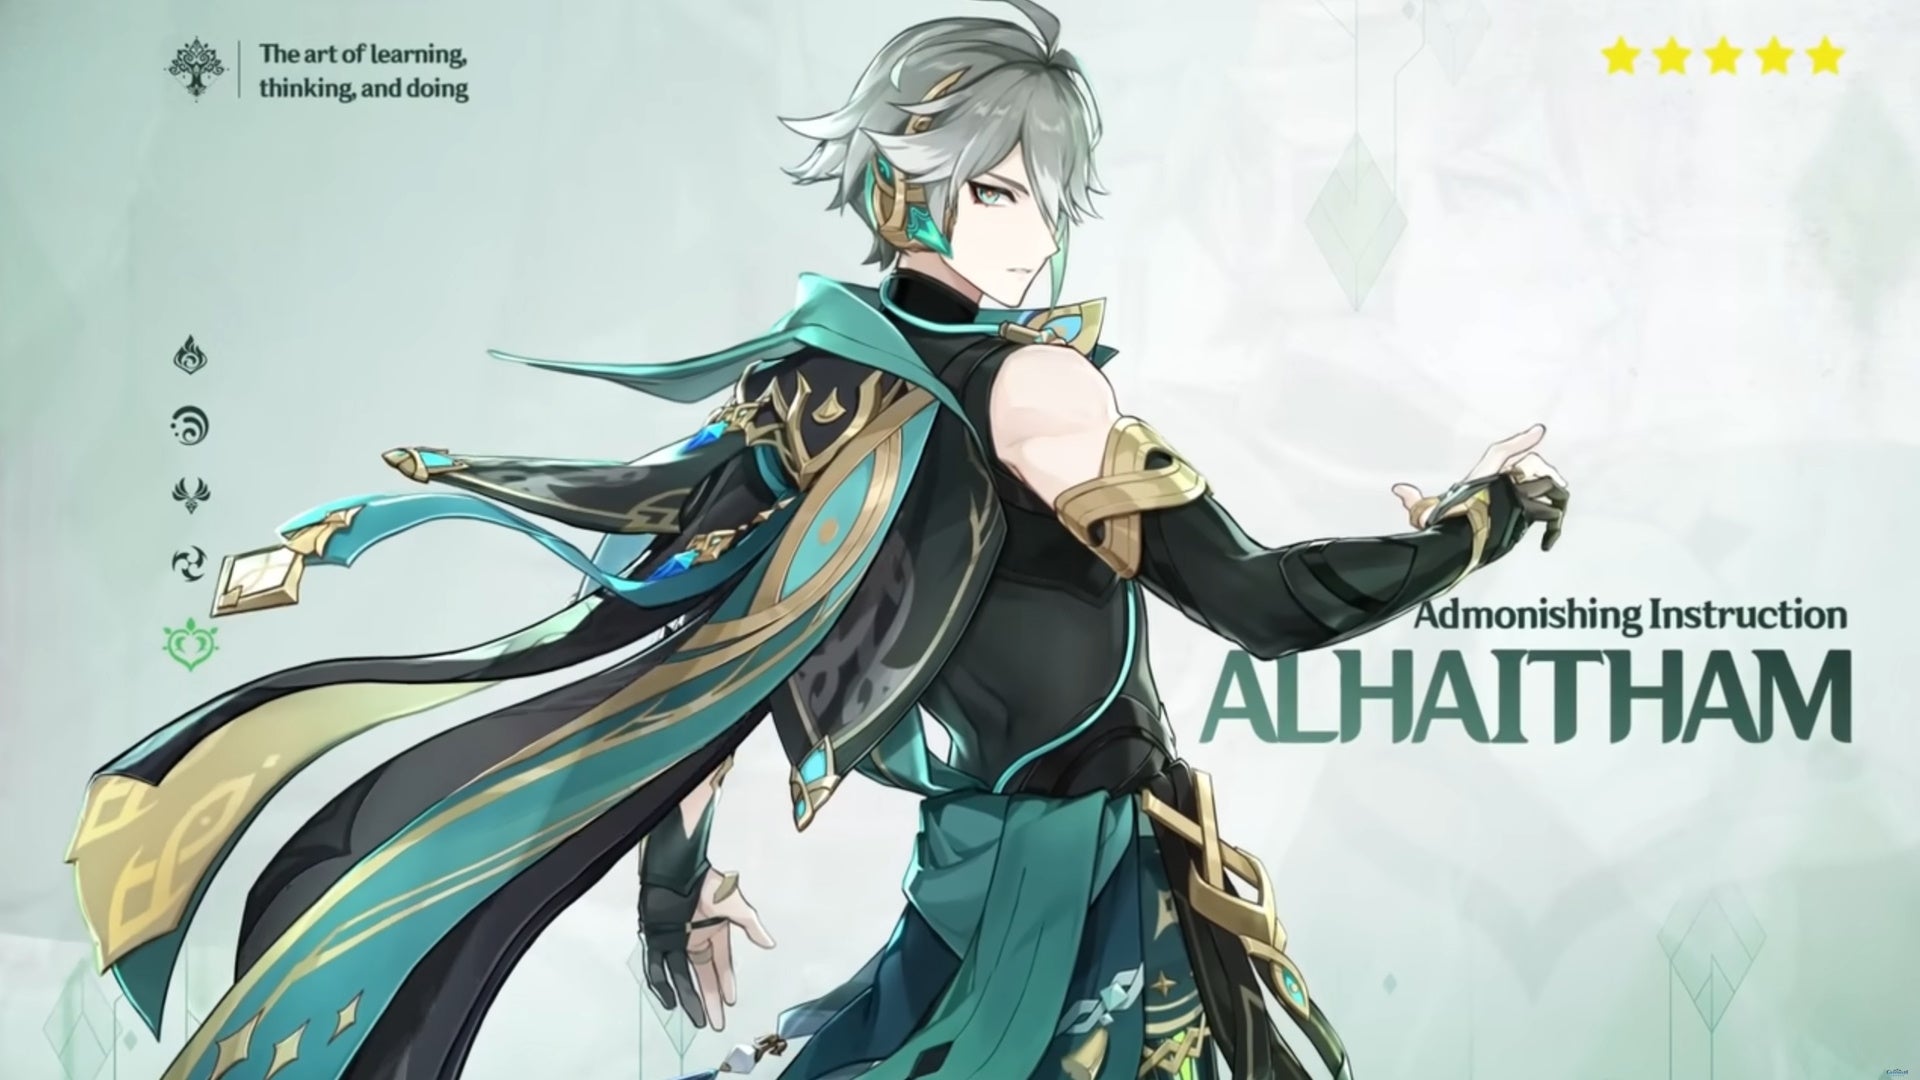 Genshin Impact Alhaitham build: An anime man with short silver hair, wearing a black tunic with a green cape, stands with one arm extended and his fist clenched in a dramatic pose.